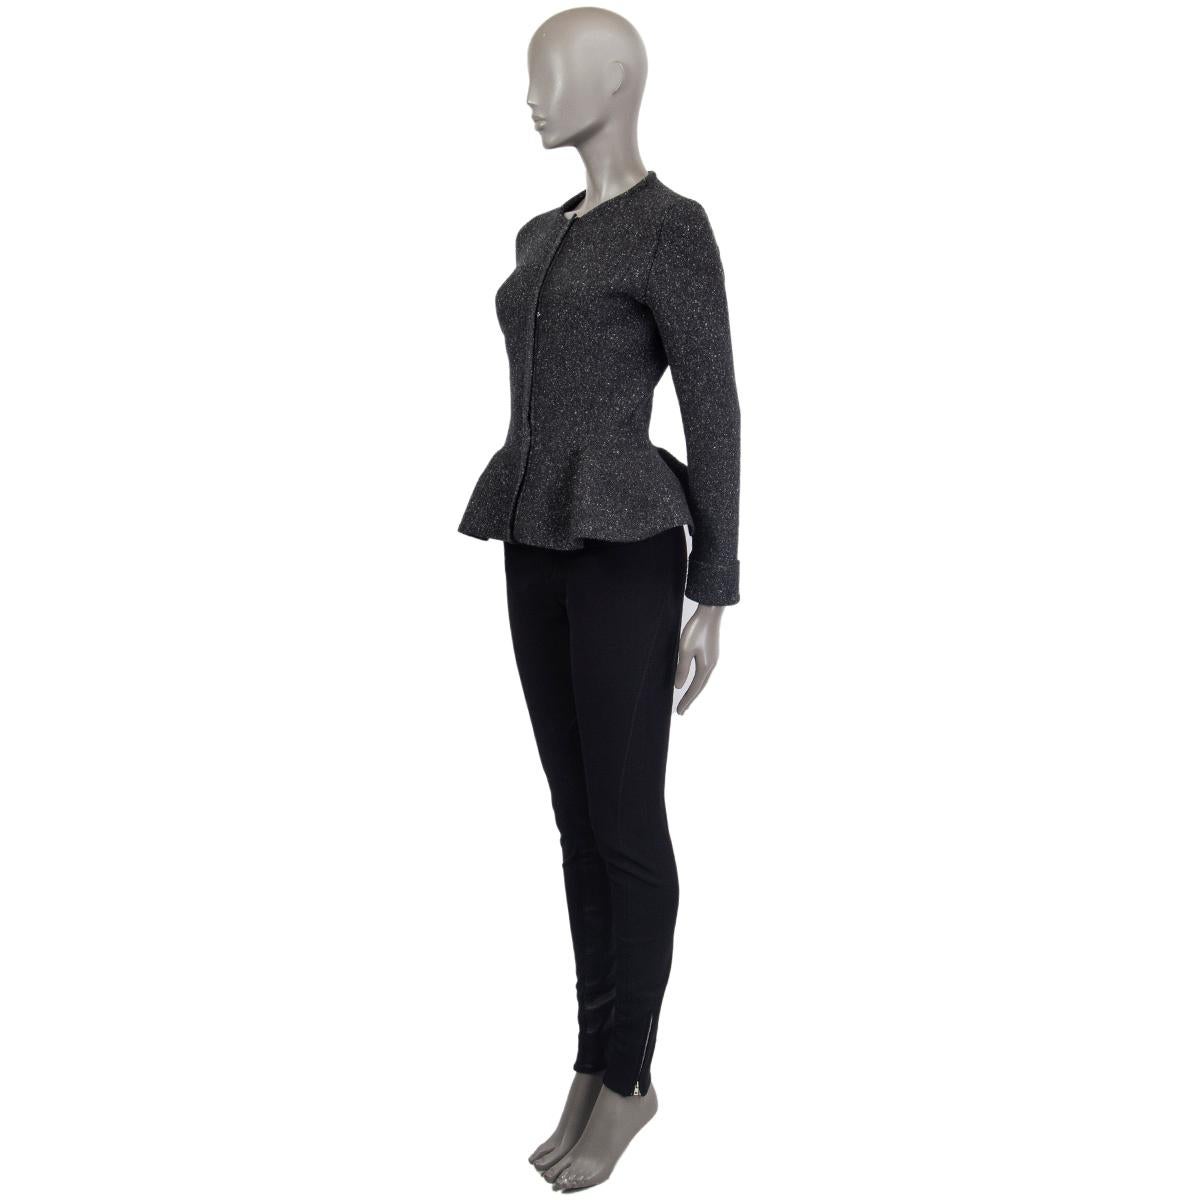 Christian Dior collarless peplum lurex knit jacket in dark grey cashmere (70%), viscose (17%), polyamide (12%) and elastane (1%) with silver lurex thread. Closes with a hidden gold-tone zipper on the front. Unlined. Has been worn and is in excellent